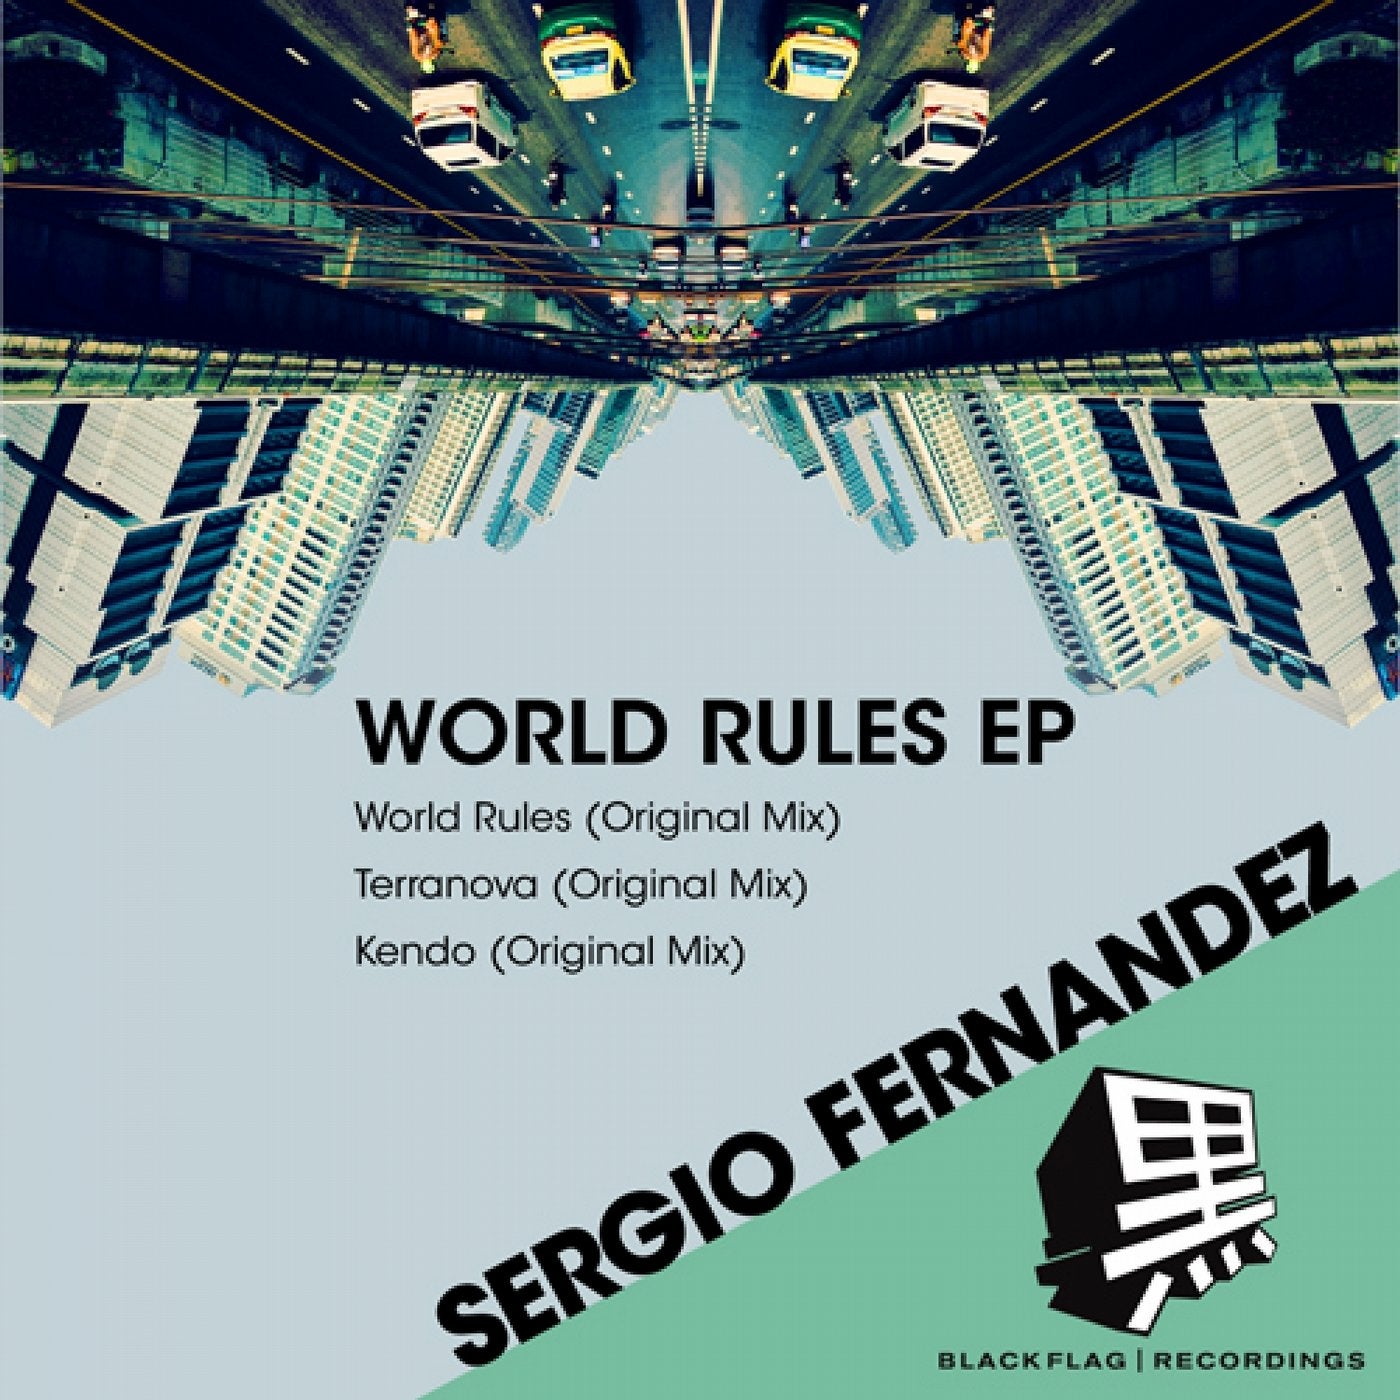 World Rules EP